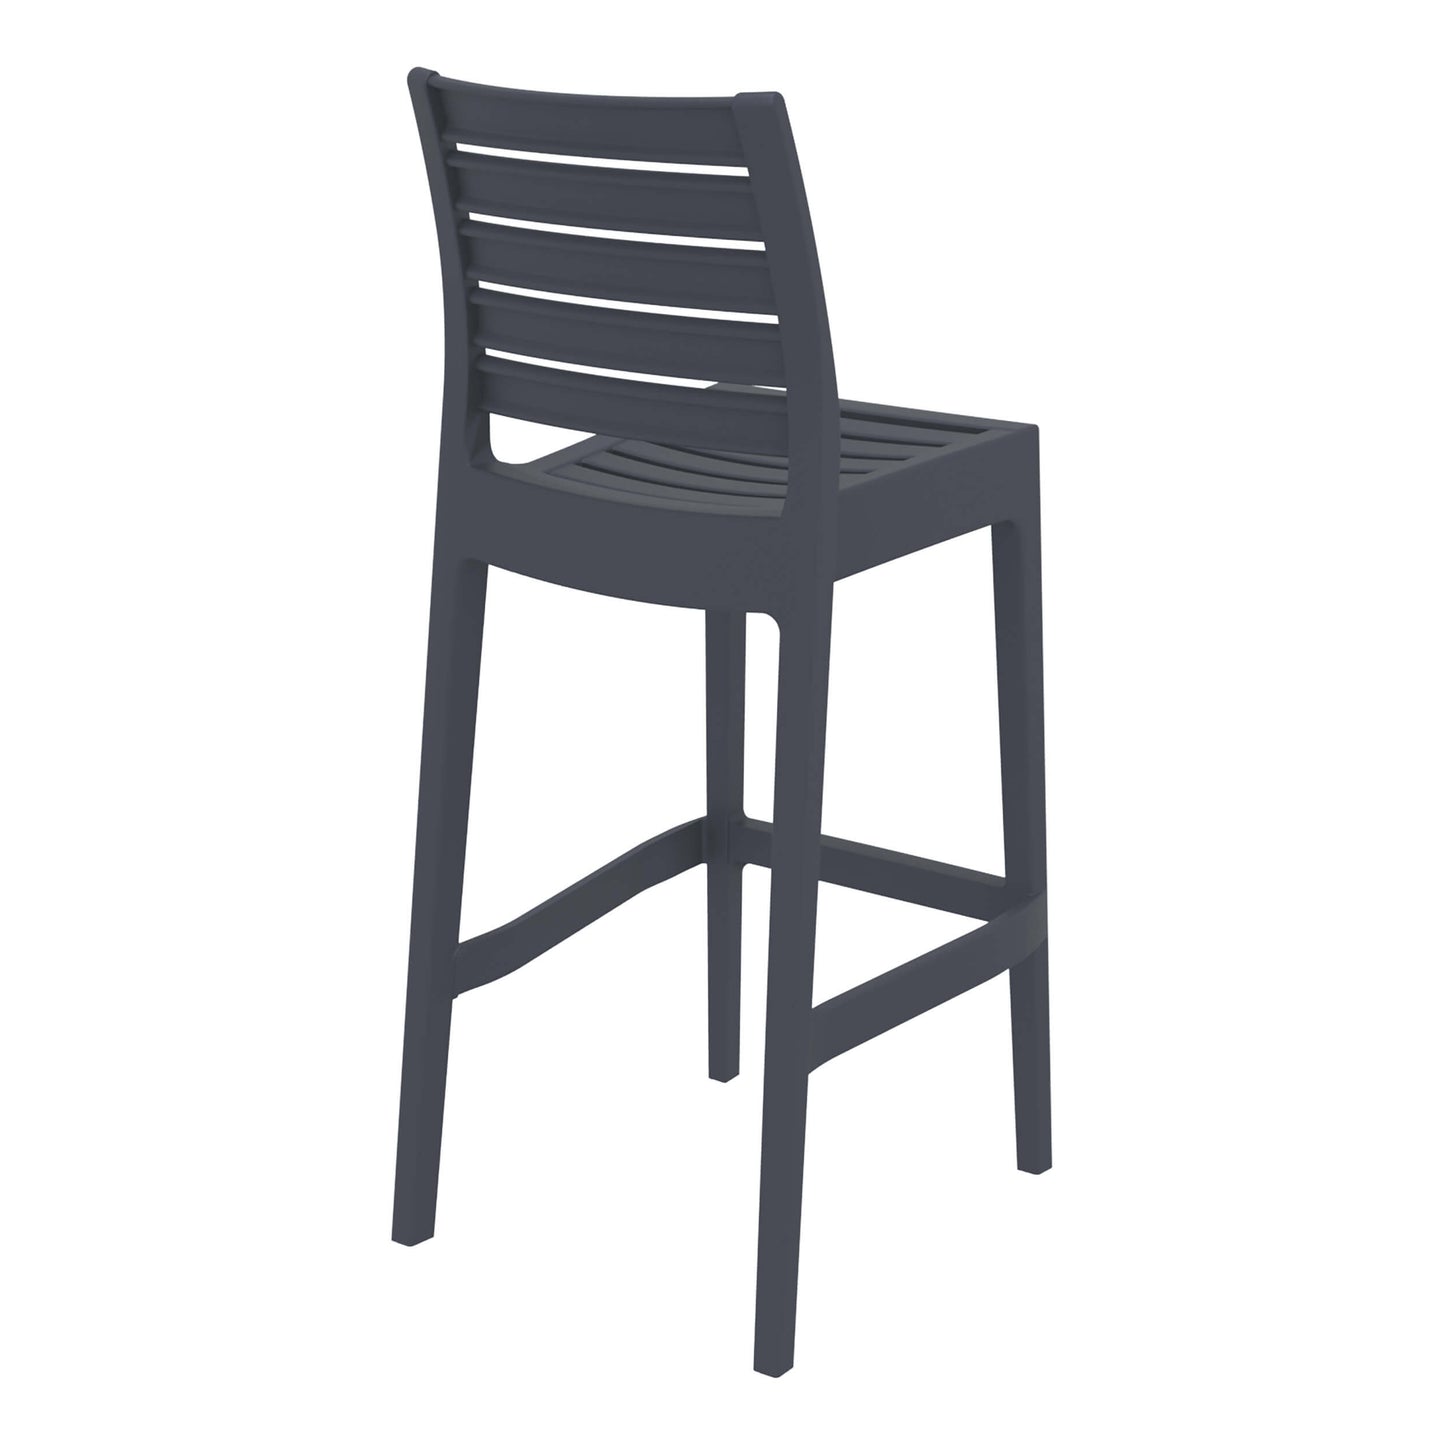 Sunnyhill | Modern Plastic Outdoor Bar Stools | Set Of 4 | Anthracite